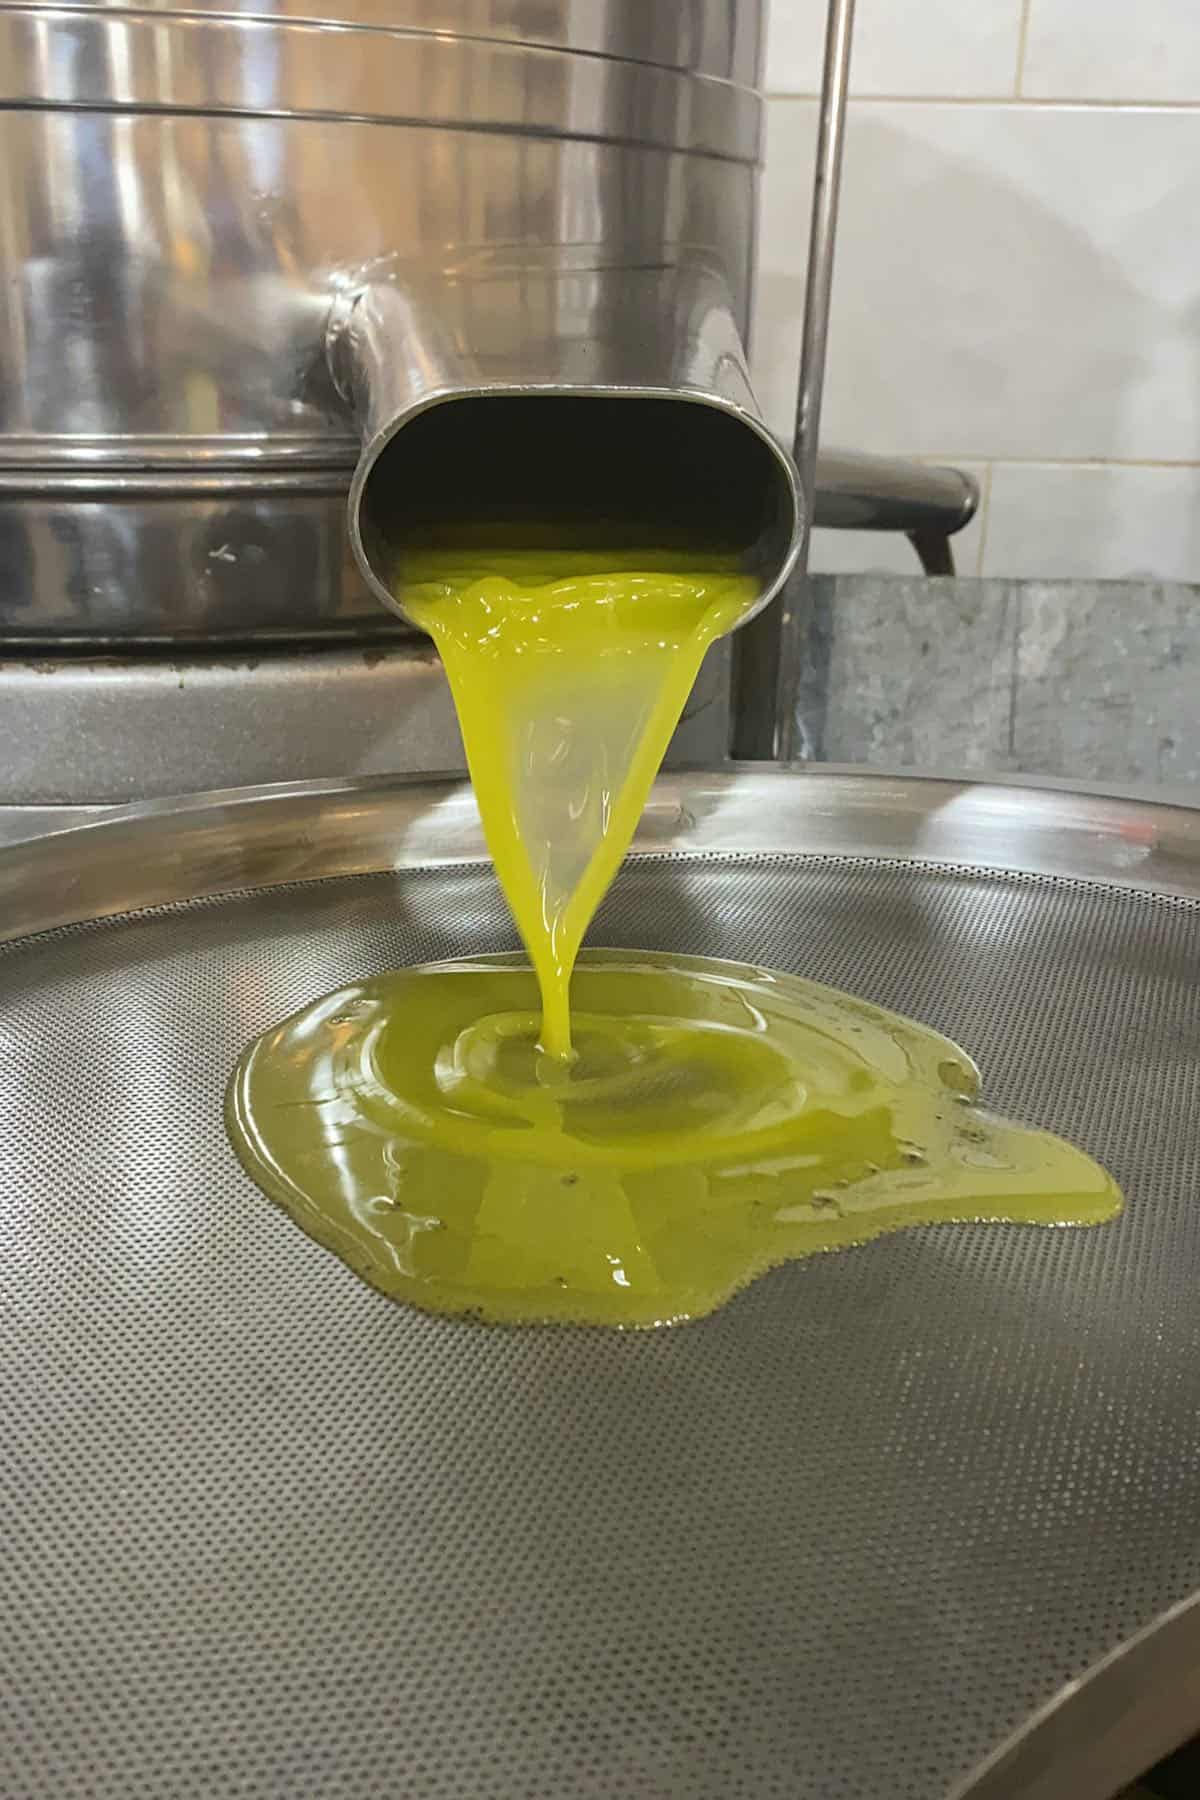 Why Does Extra Virgin Olive Oil Solidify?